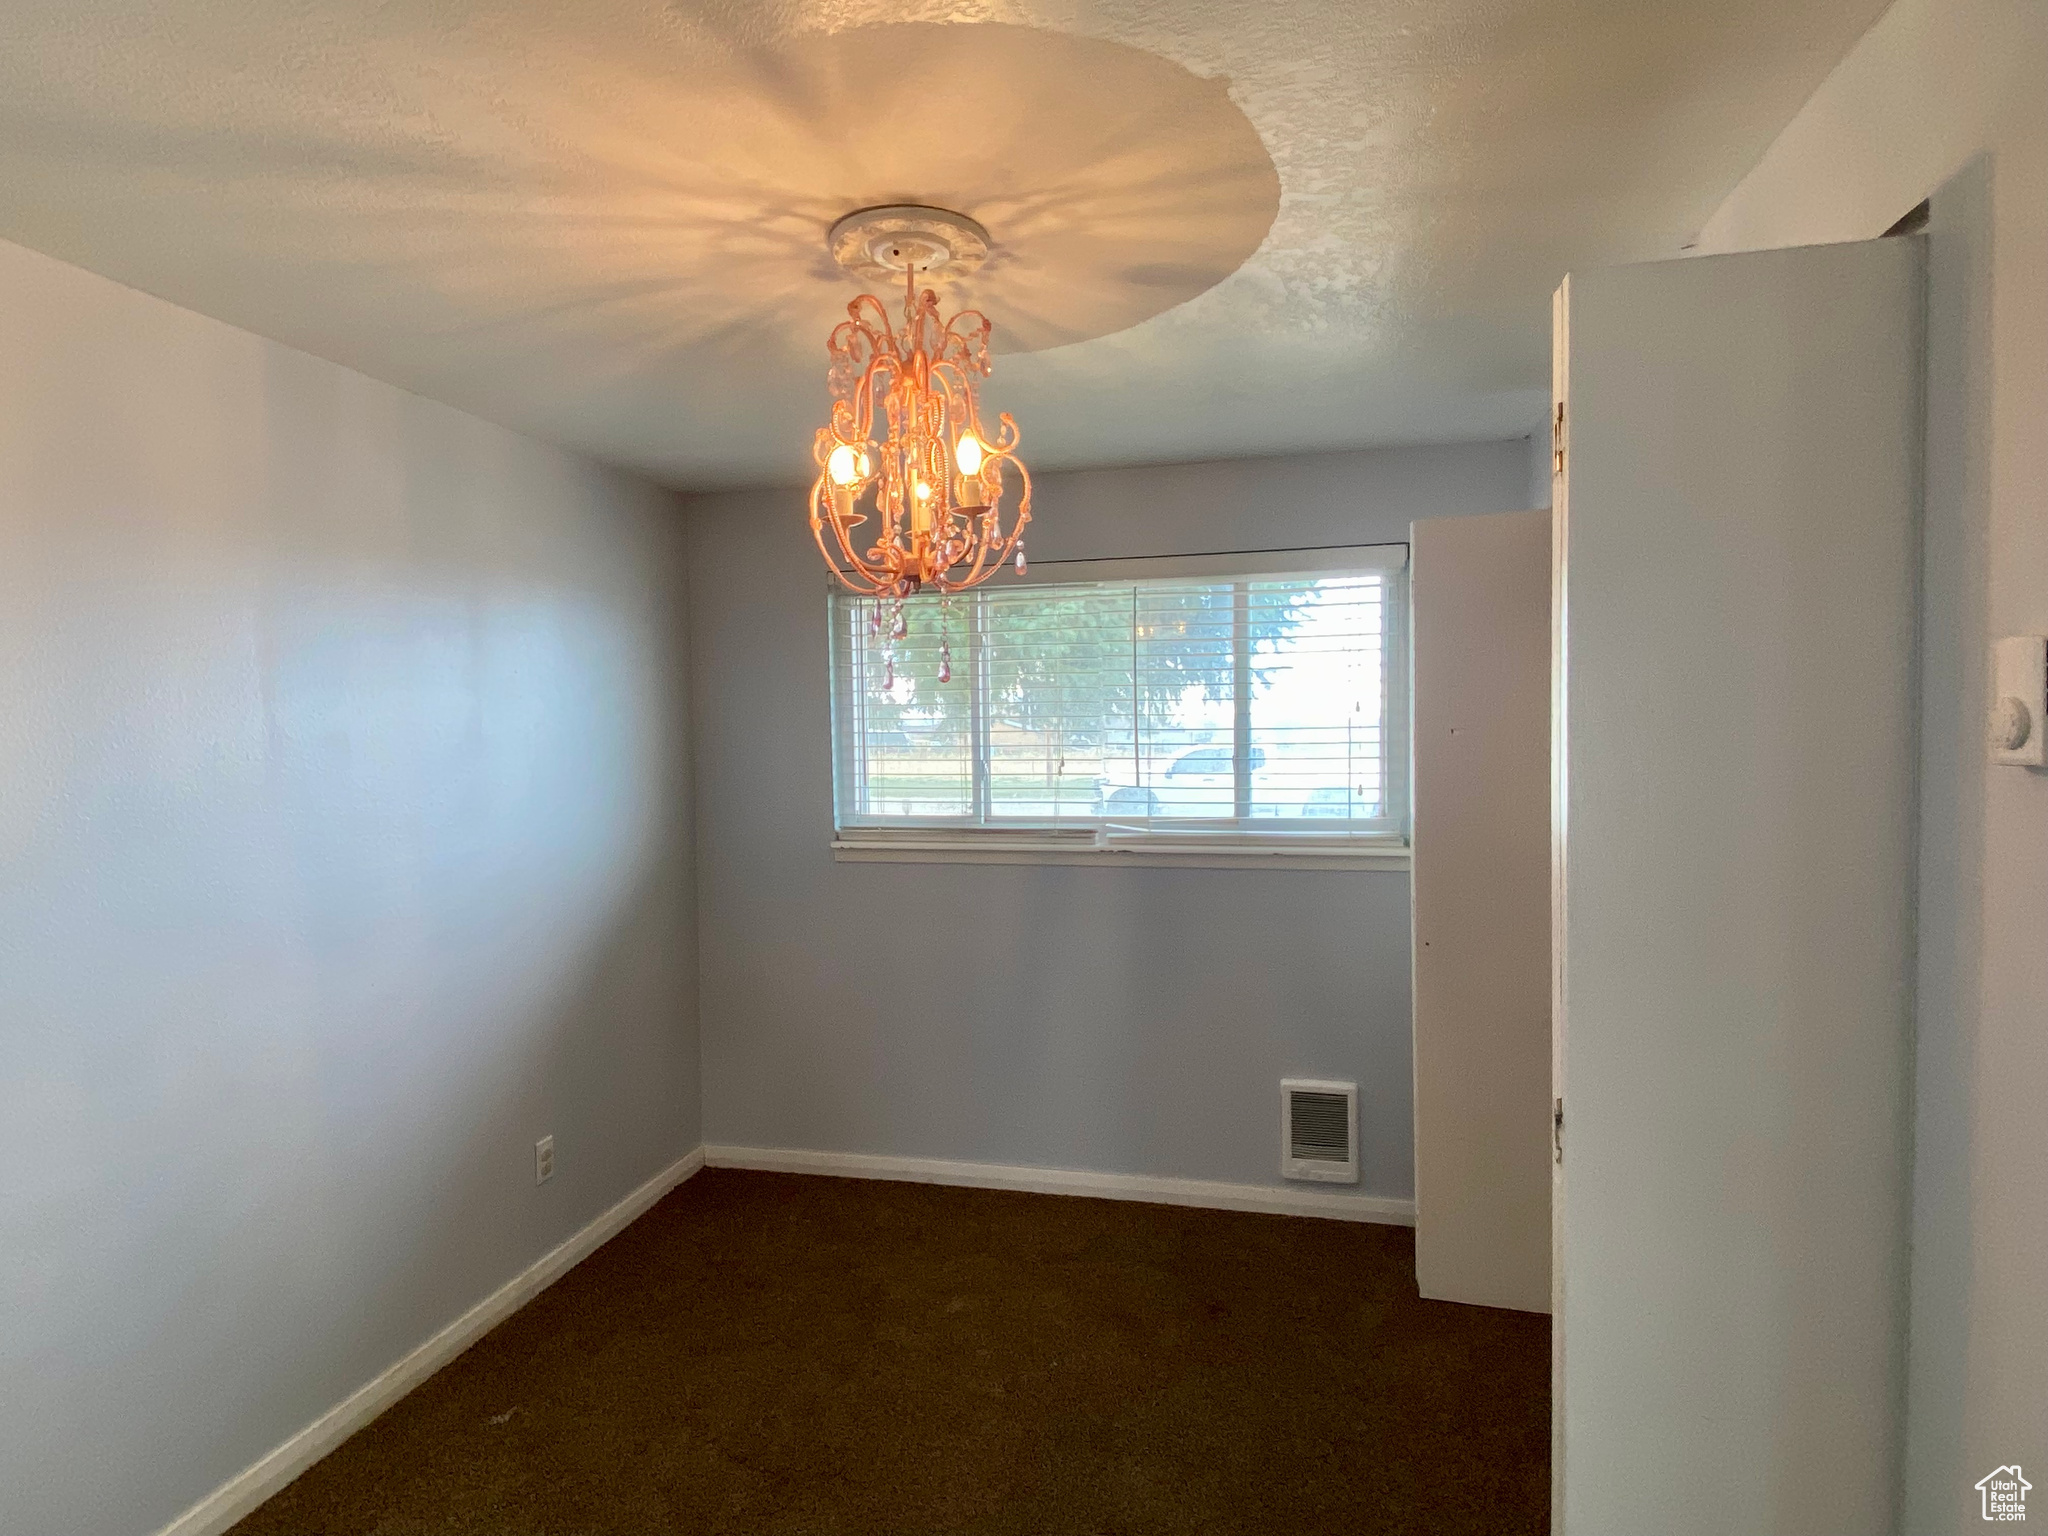 Carpeted spare room with a notable chandelier